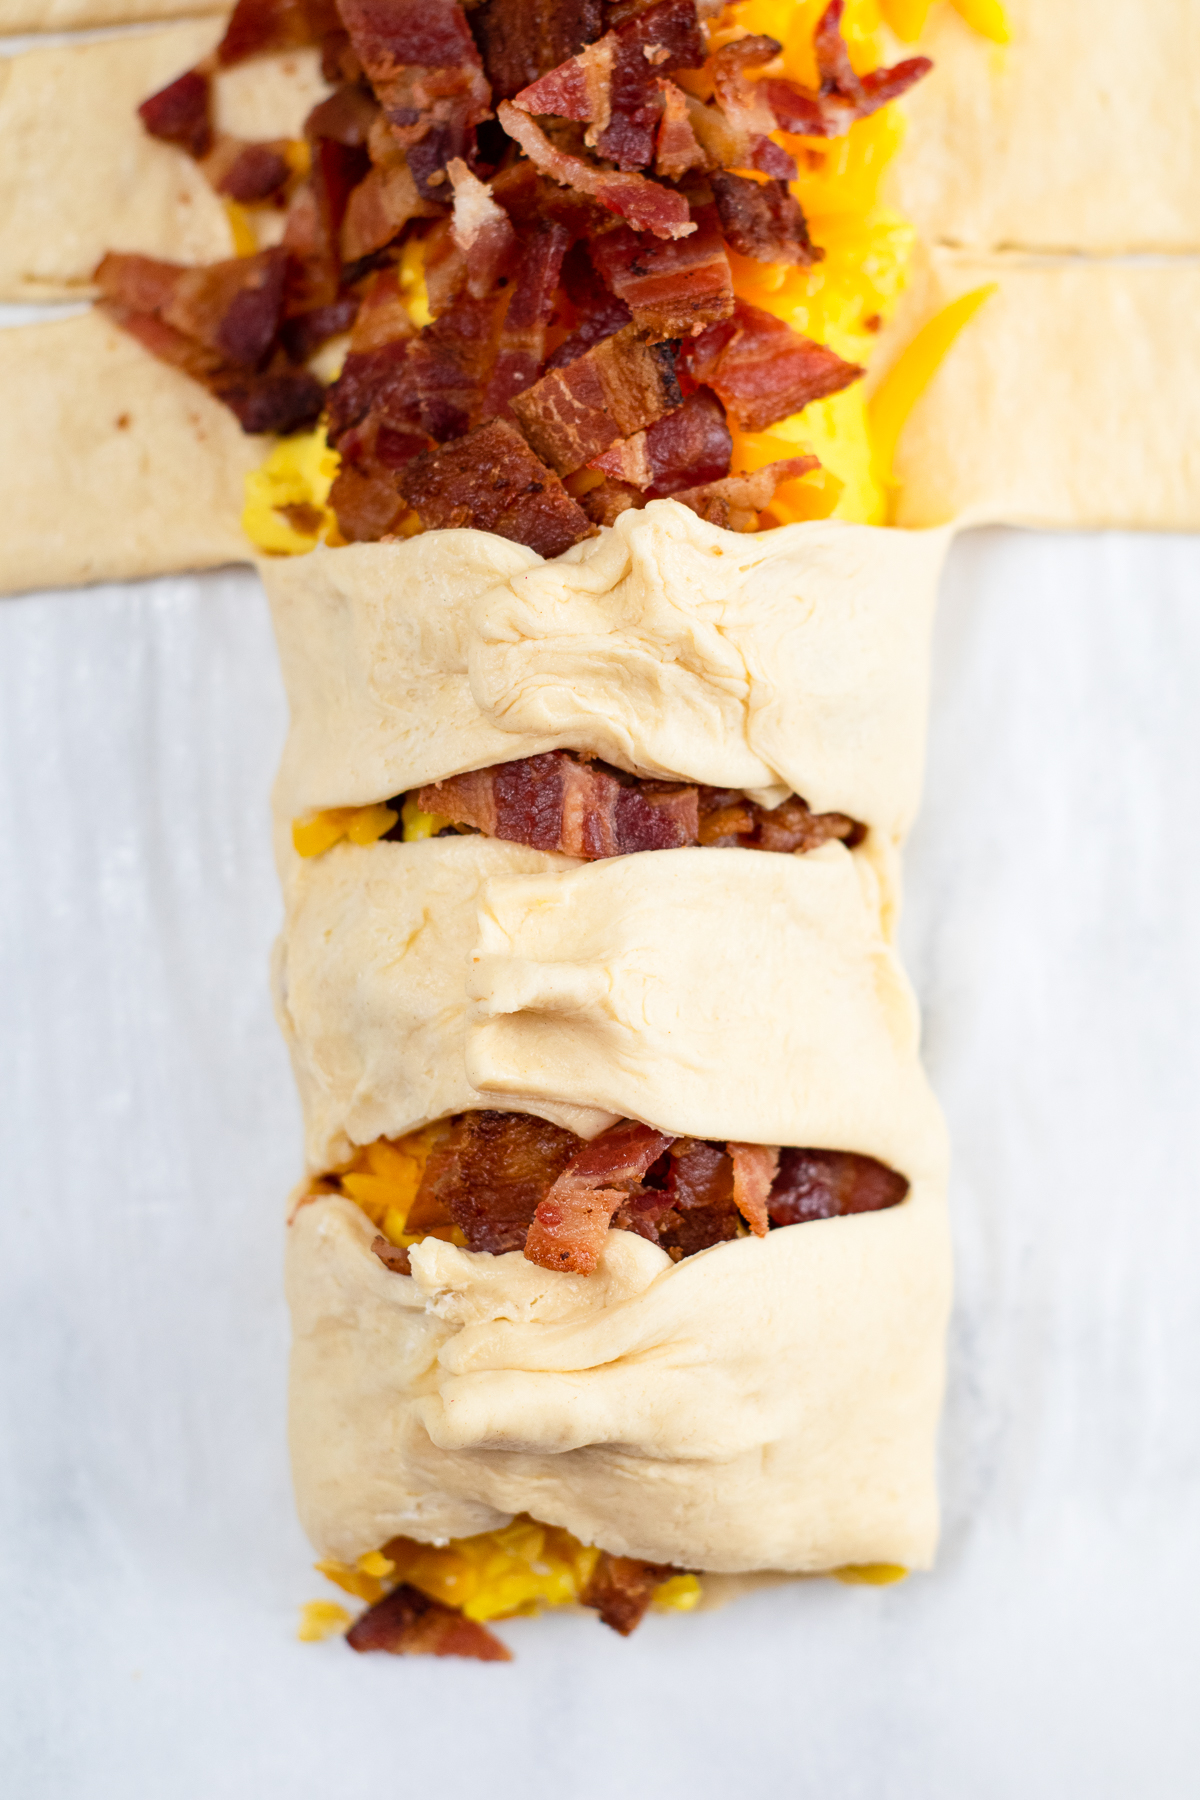 Folding crescent dough strips over the bacon, eggs and cheese.